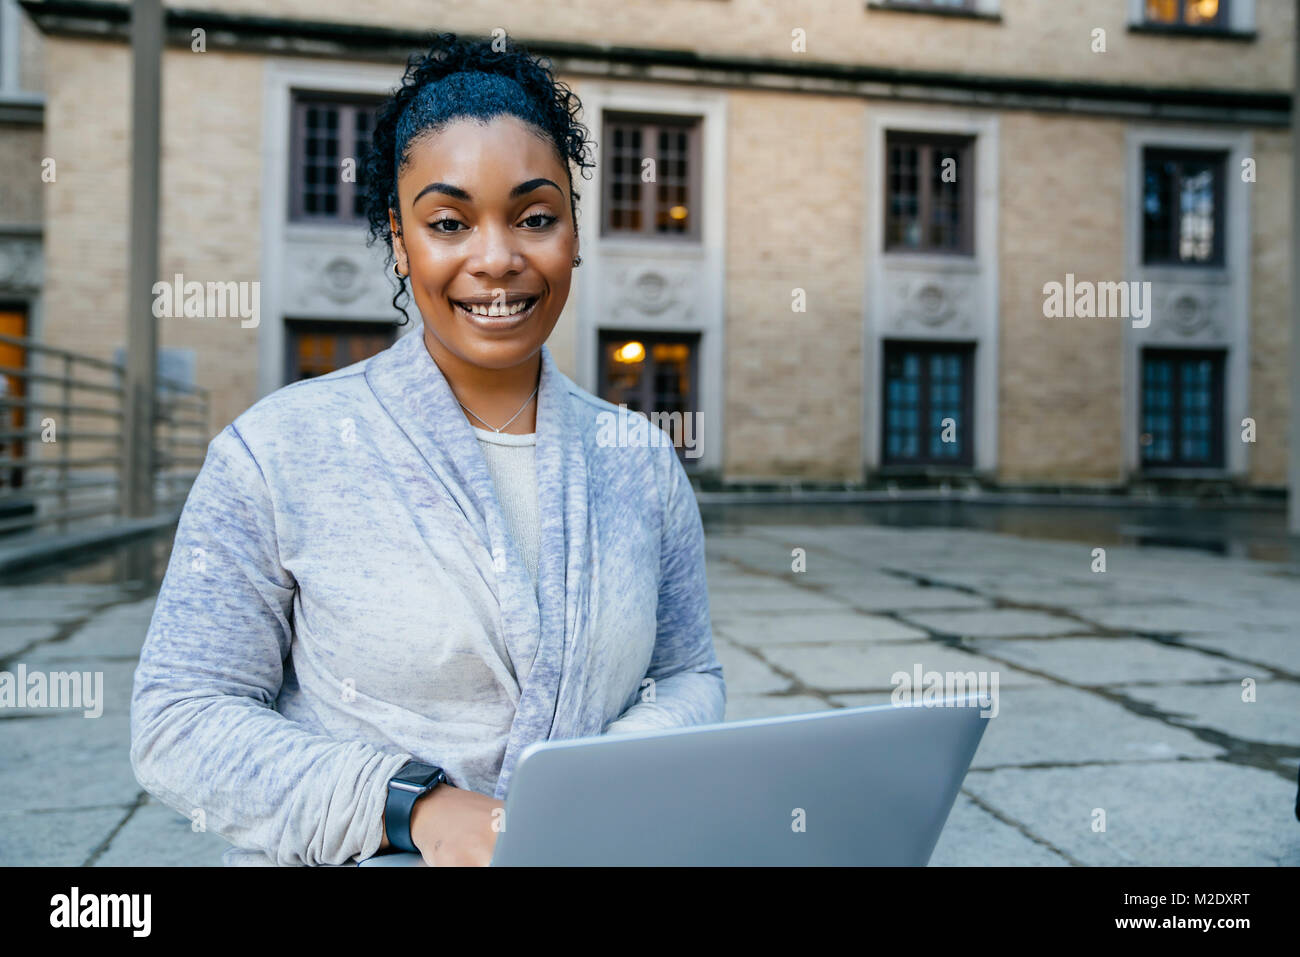 Portrait of smiling Black woman using laptop outdoors Stock Photo